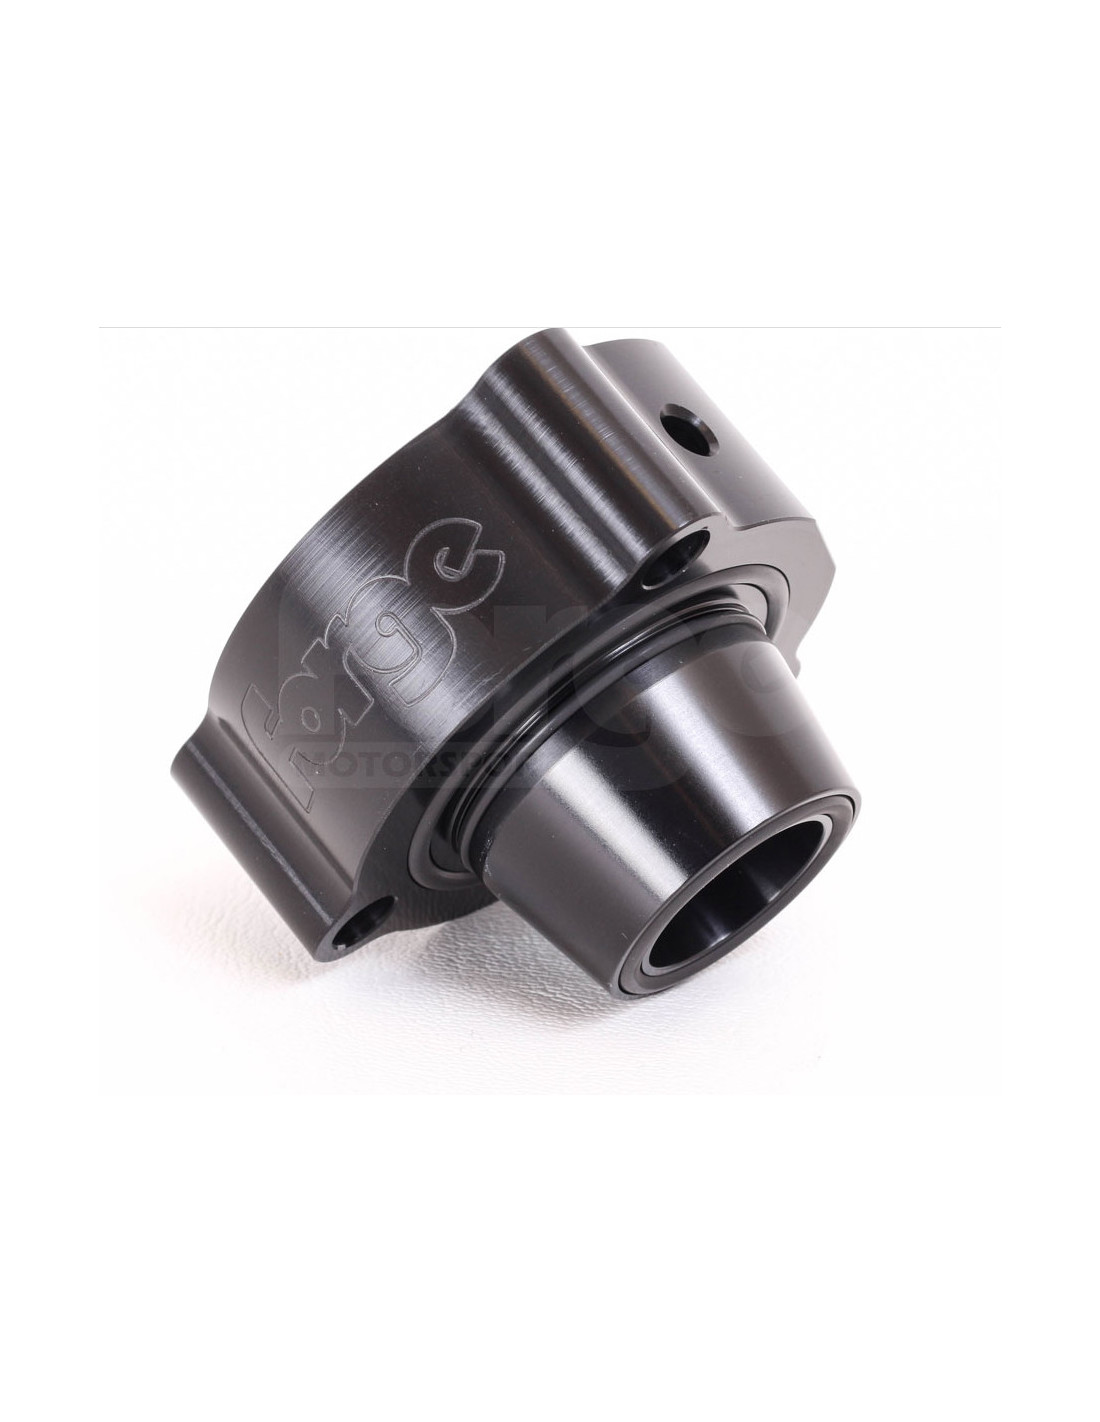 Forge Motorsport Turbo Actuator For Audi A4 A6 2.0 TFSi 